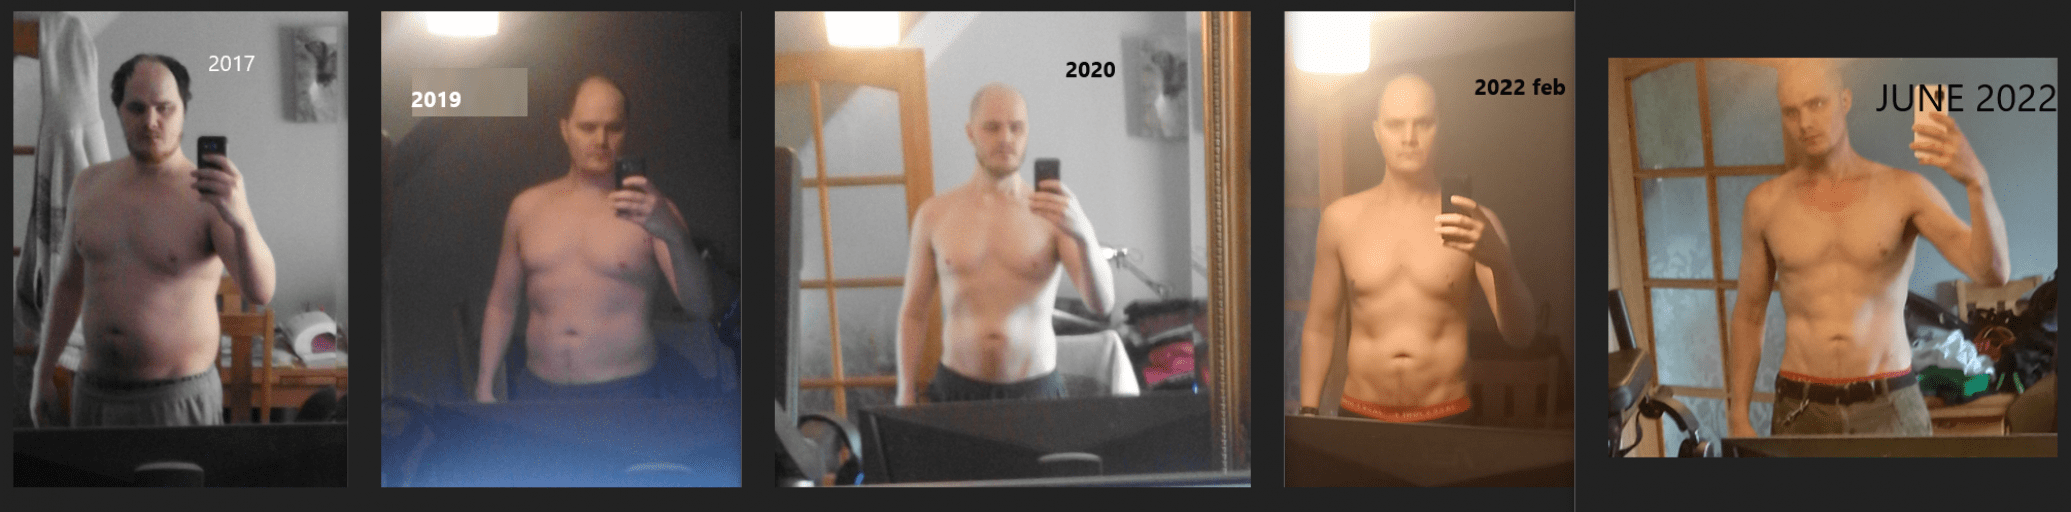 A photo of a 6'1" man showing a weight cut from 273 pounds to 166 pounds. A net loss of 107 pounds.